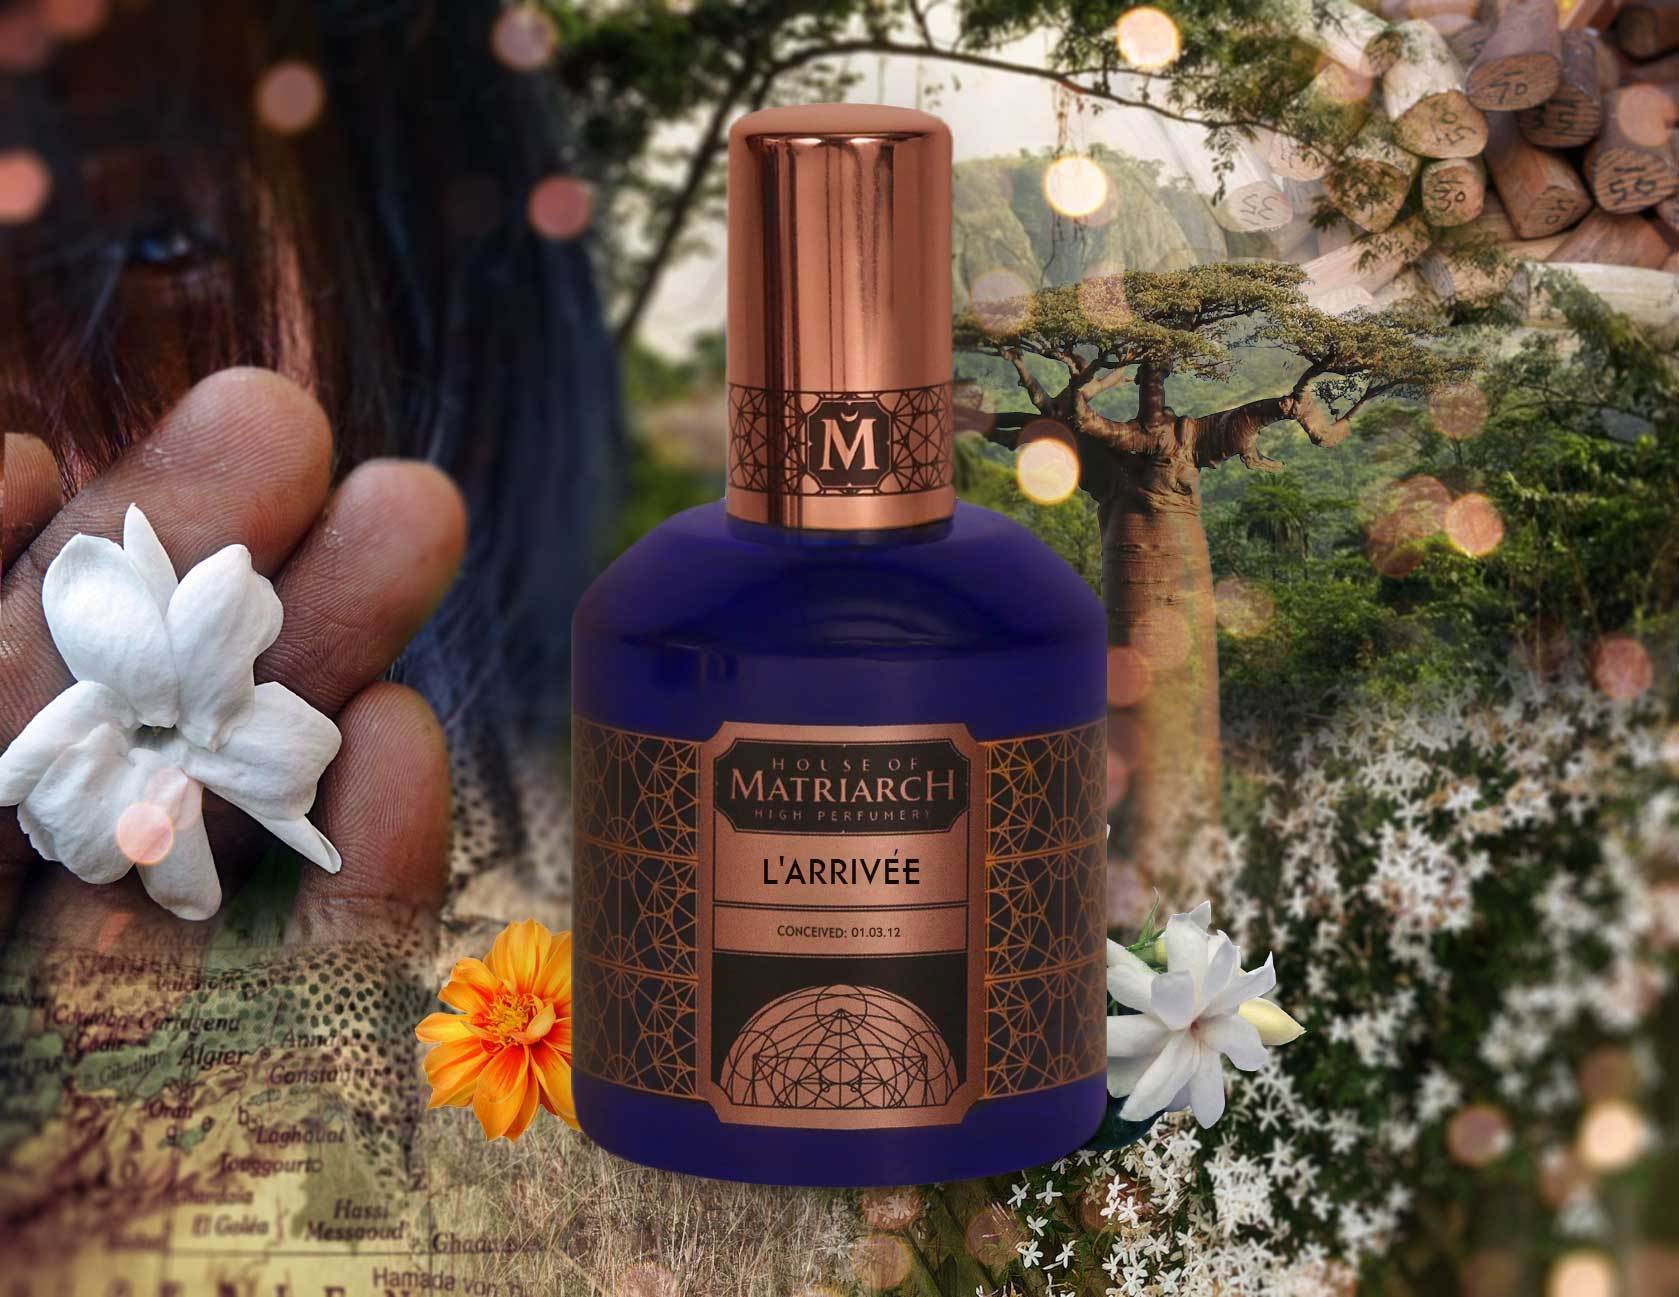 L'ARRIVEE: New "masculine floral" fine fragrance from House of Matriarch: All about the Jasmine!